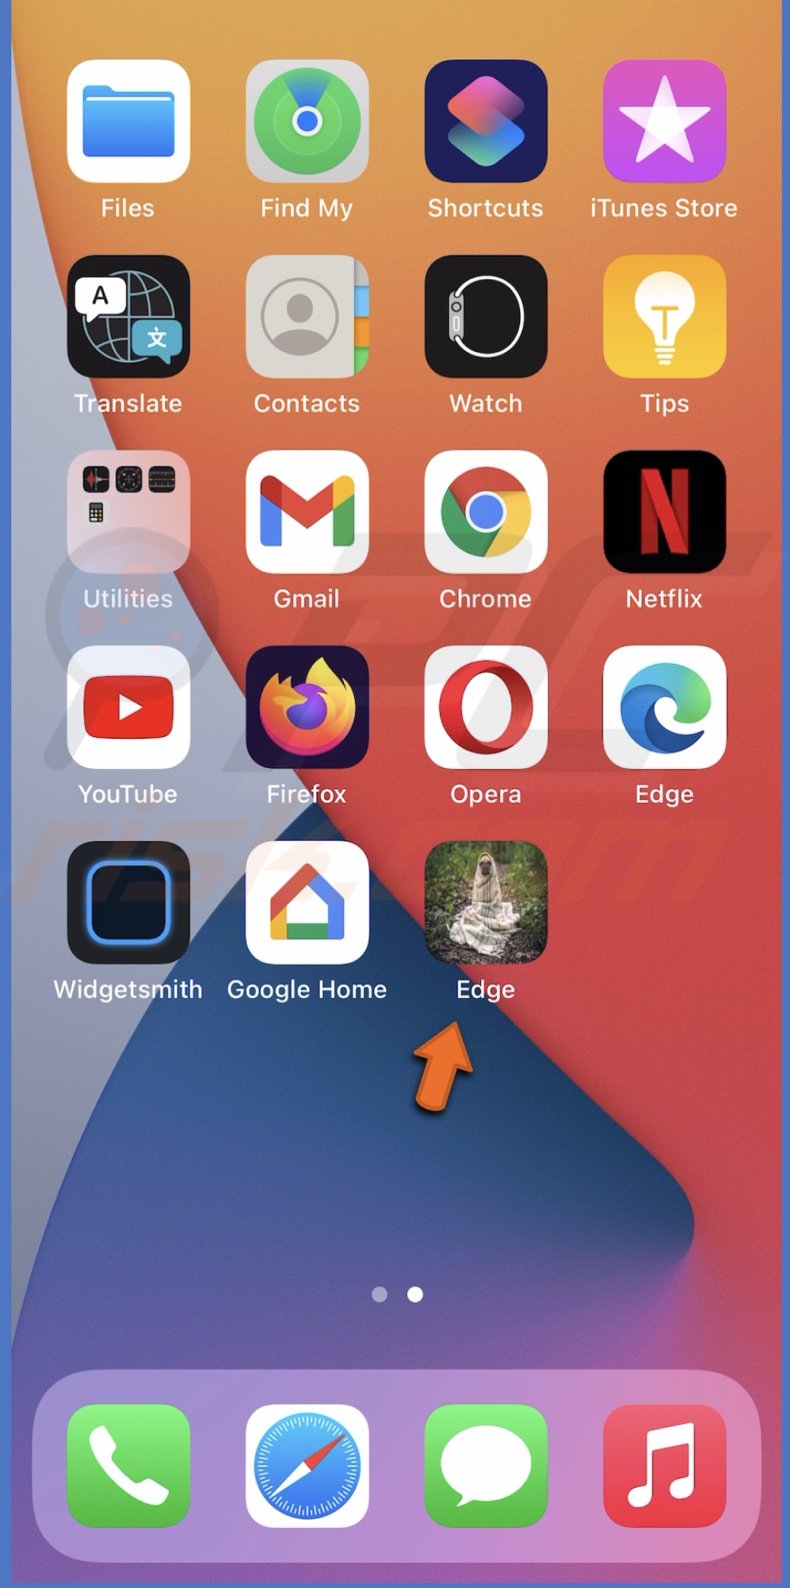 Shortcut added to Home Screen